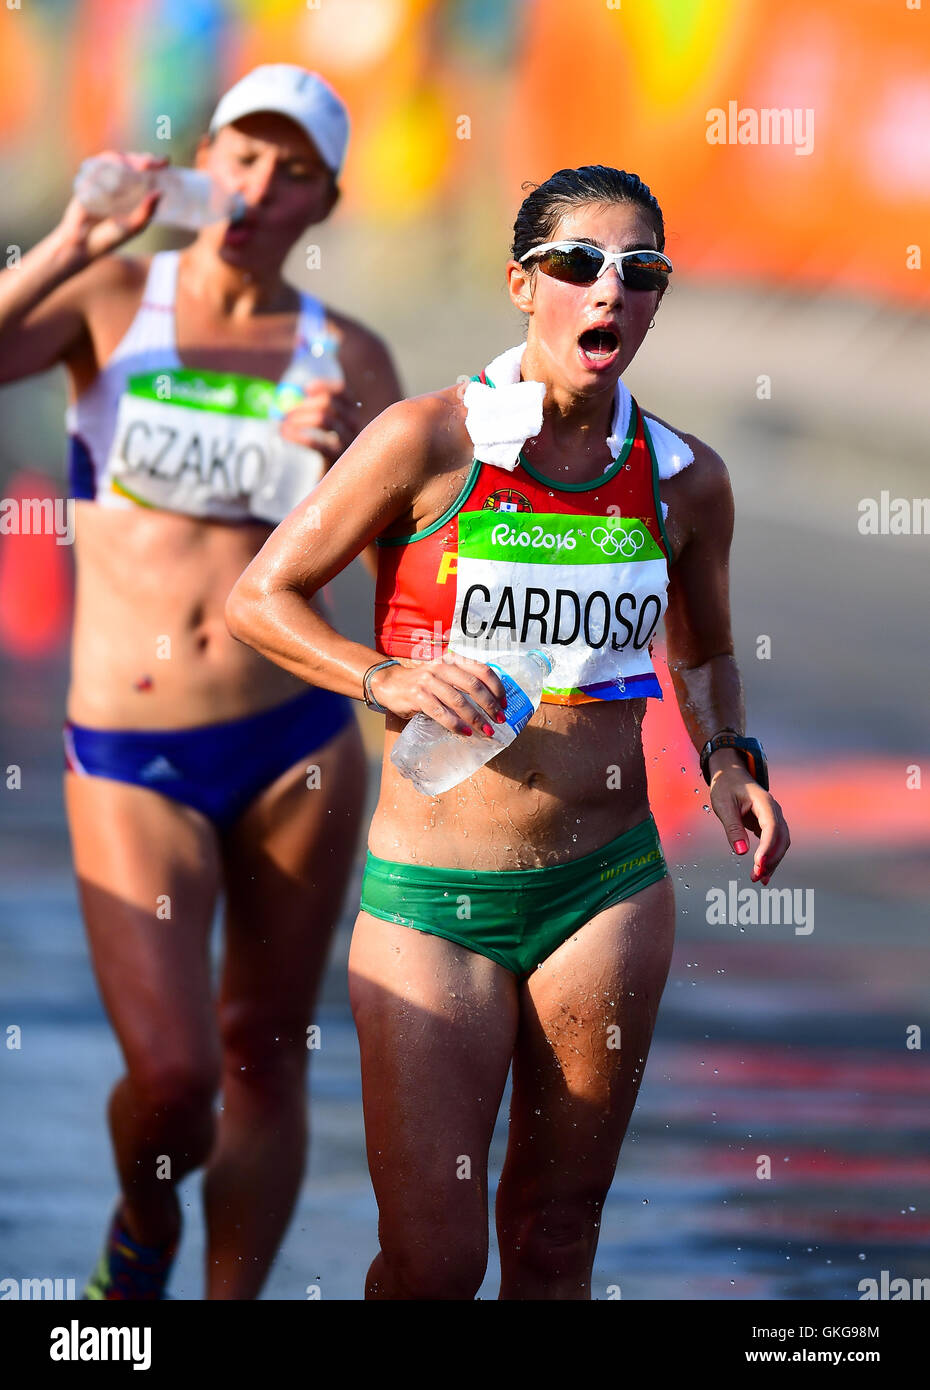 Rio de Janeiro, Brazil. 19th August, 2016. Daniela Cardoso of Portugal during the womens 20km race walk on Day 14 of the 2016 Rio Olympics at Pontal on August 19, 2016 in Rio de Janeiro, Brazil. (Photo by Roger Sedres/Gallo Images) Credit:  Roger Sedres/Alamy Live News Stock Photo